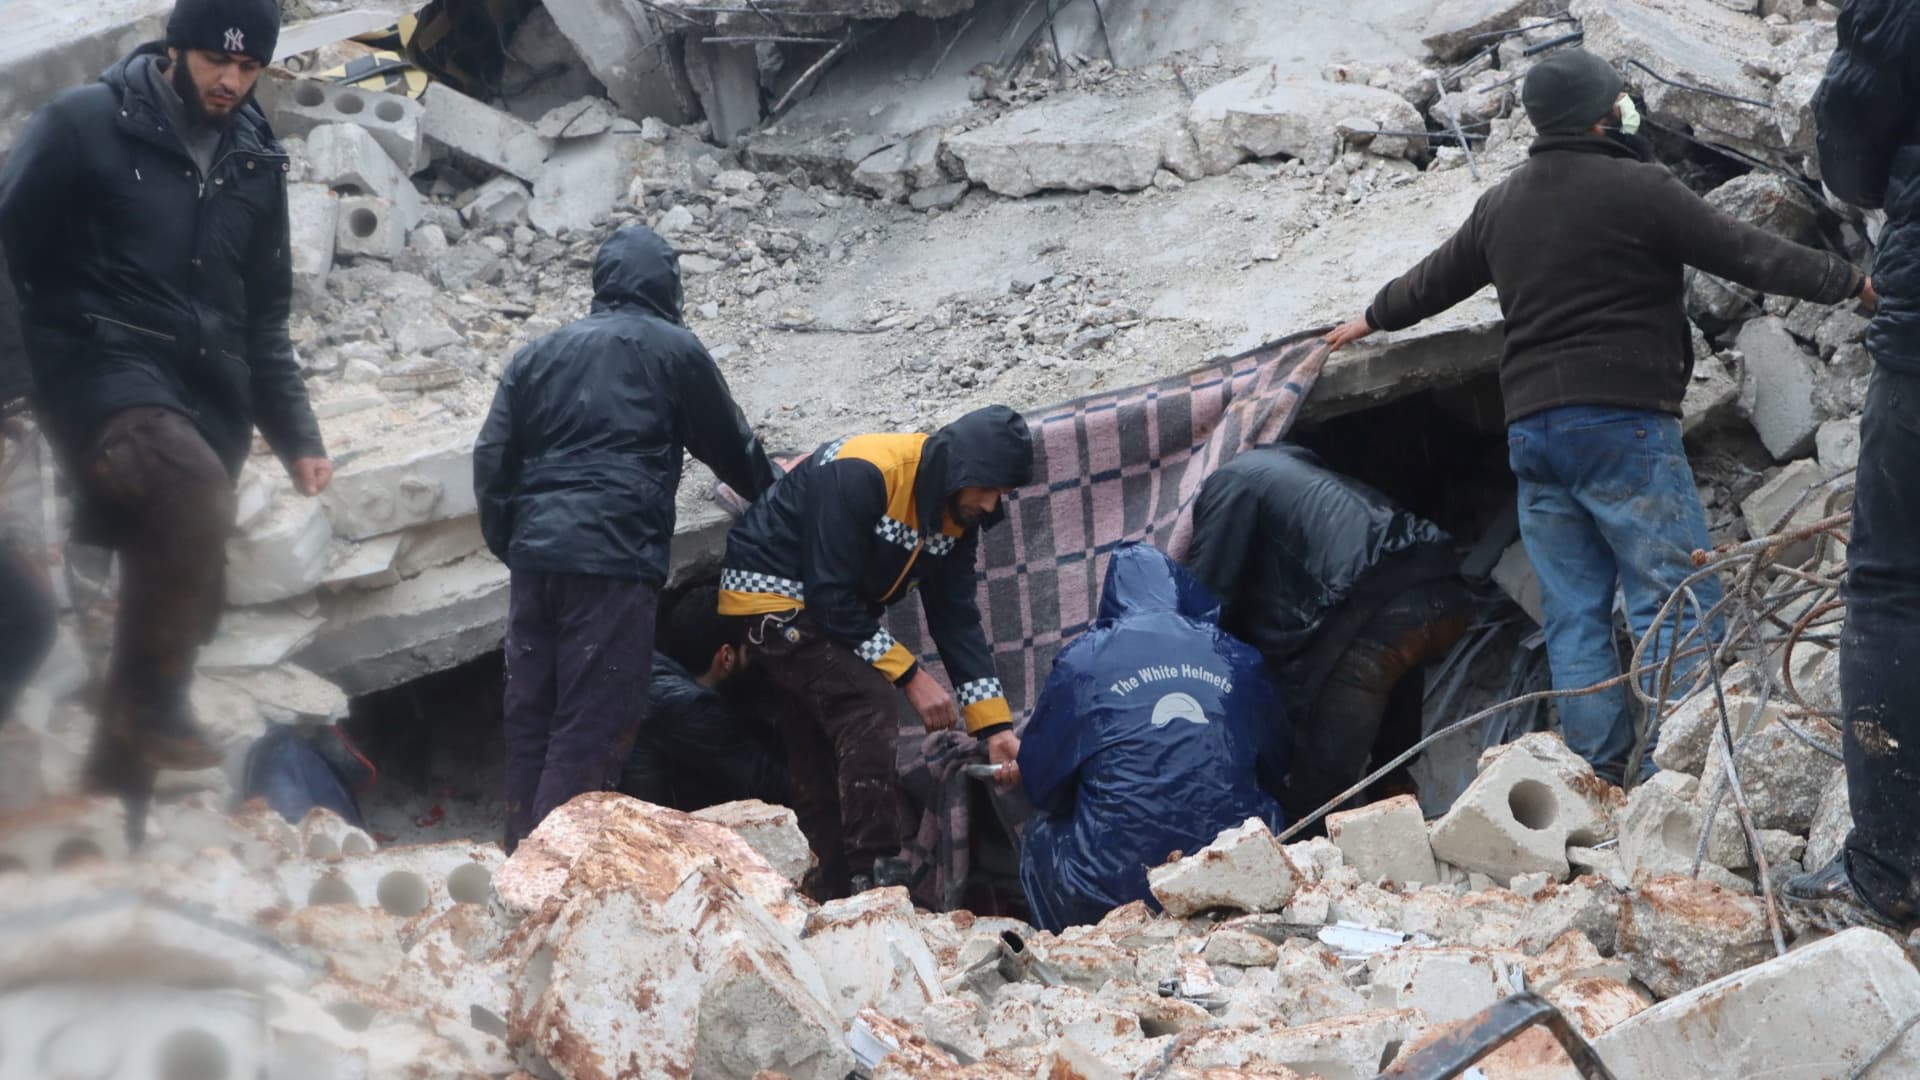 Rescuers search for survivors under the rubble, following an earthquake, in Al Atarib, Syria February 6, 2023 in this picture obtained from social media. 